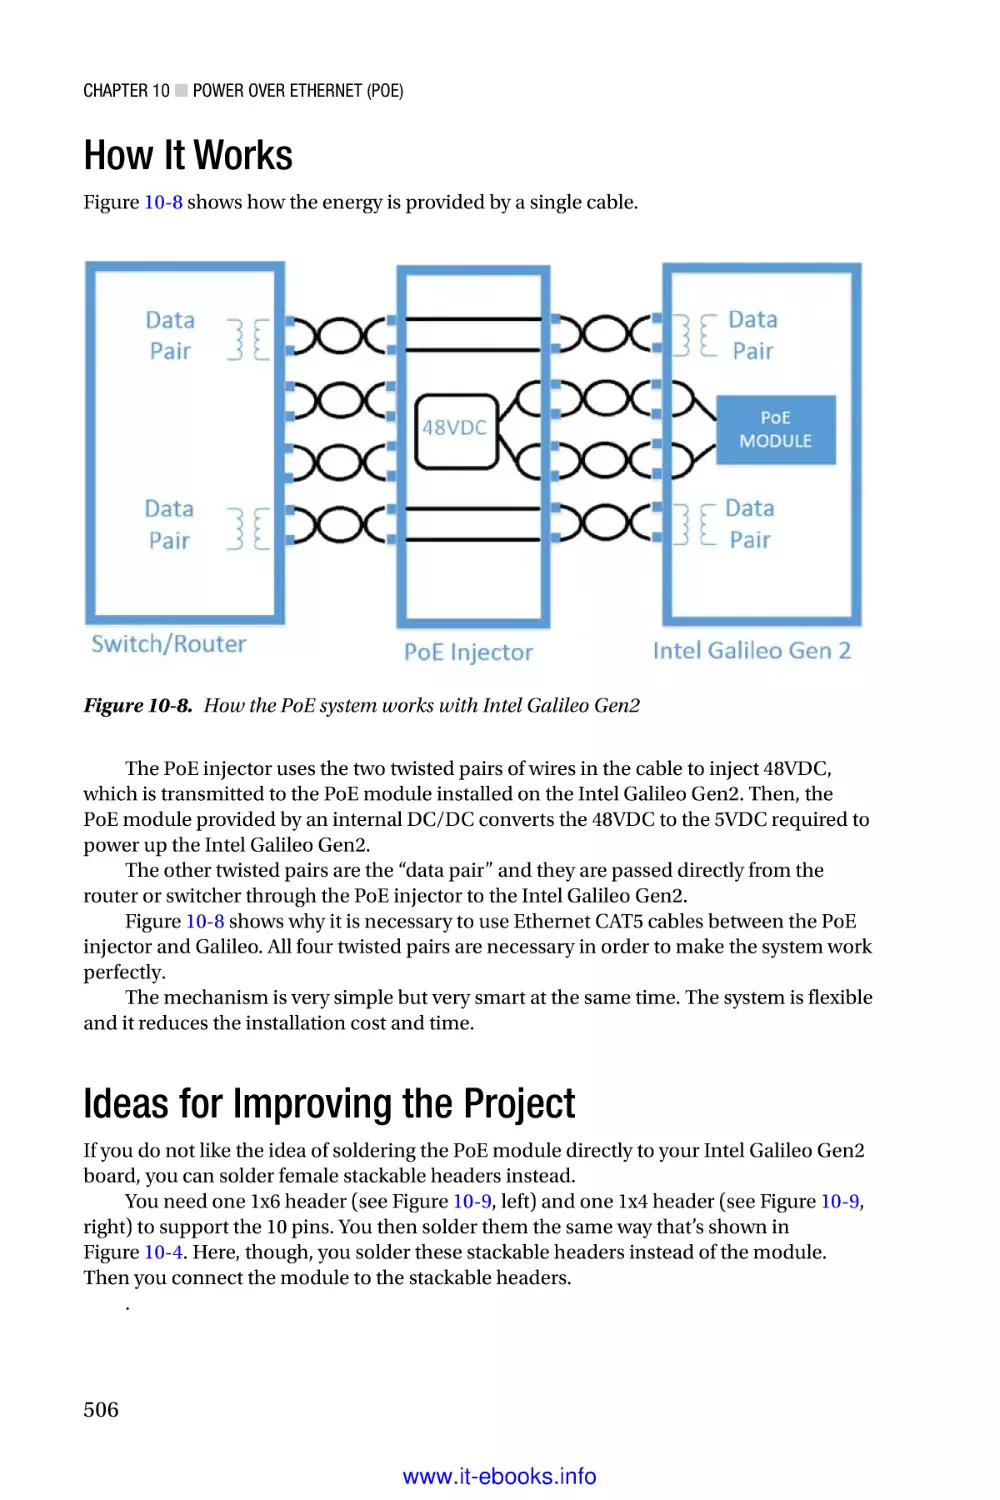 How It Works
Ideas for Improving the Project